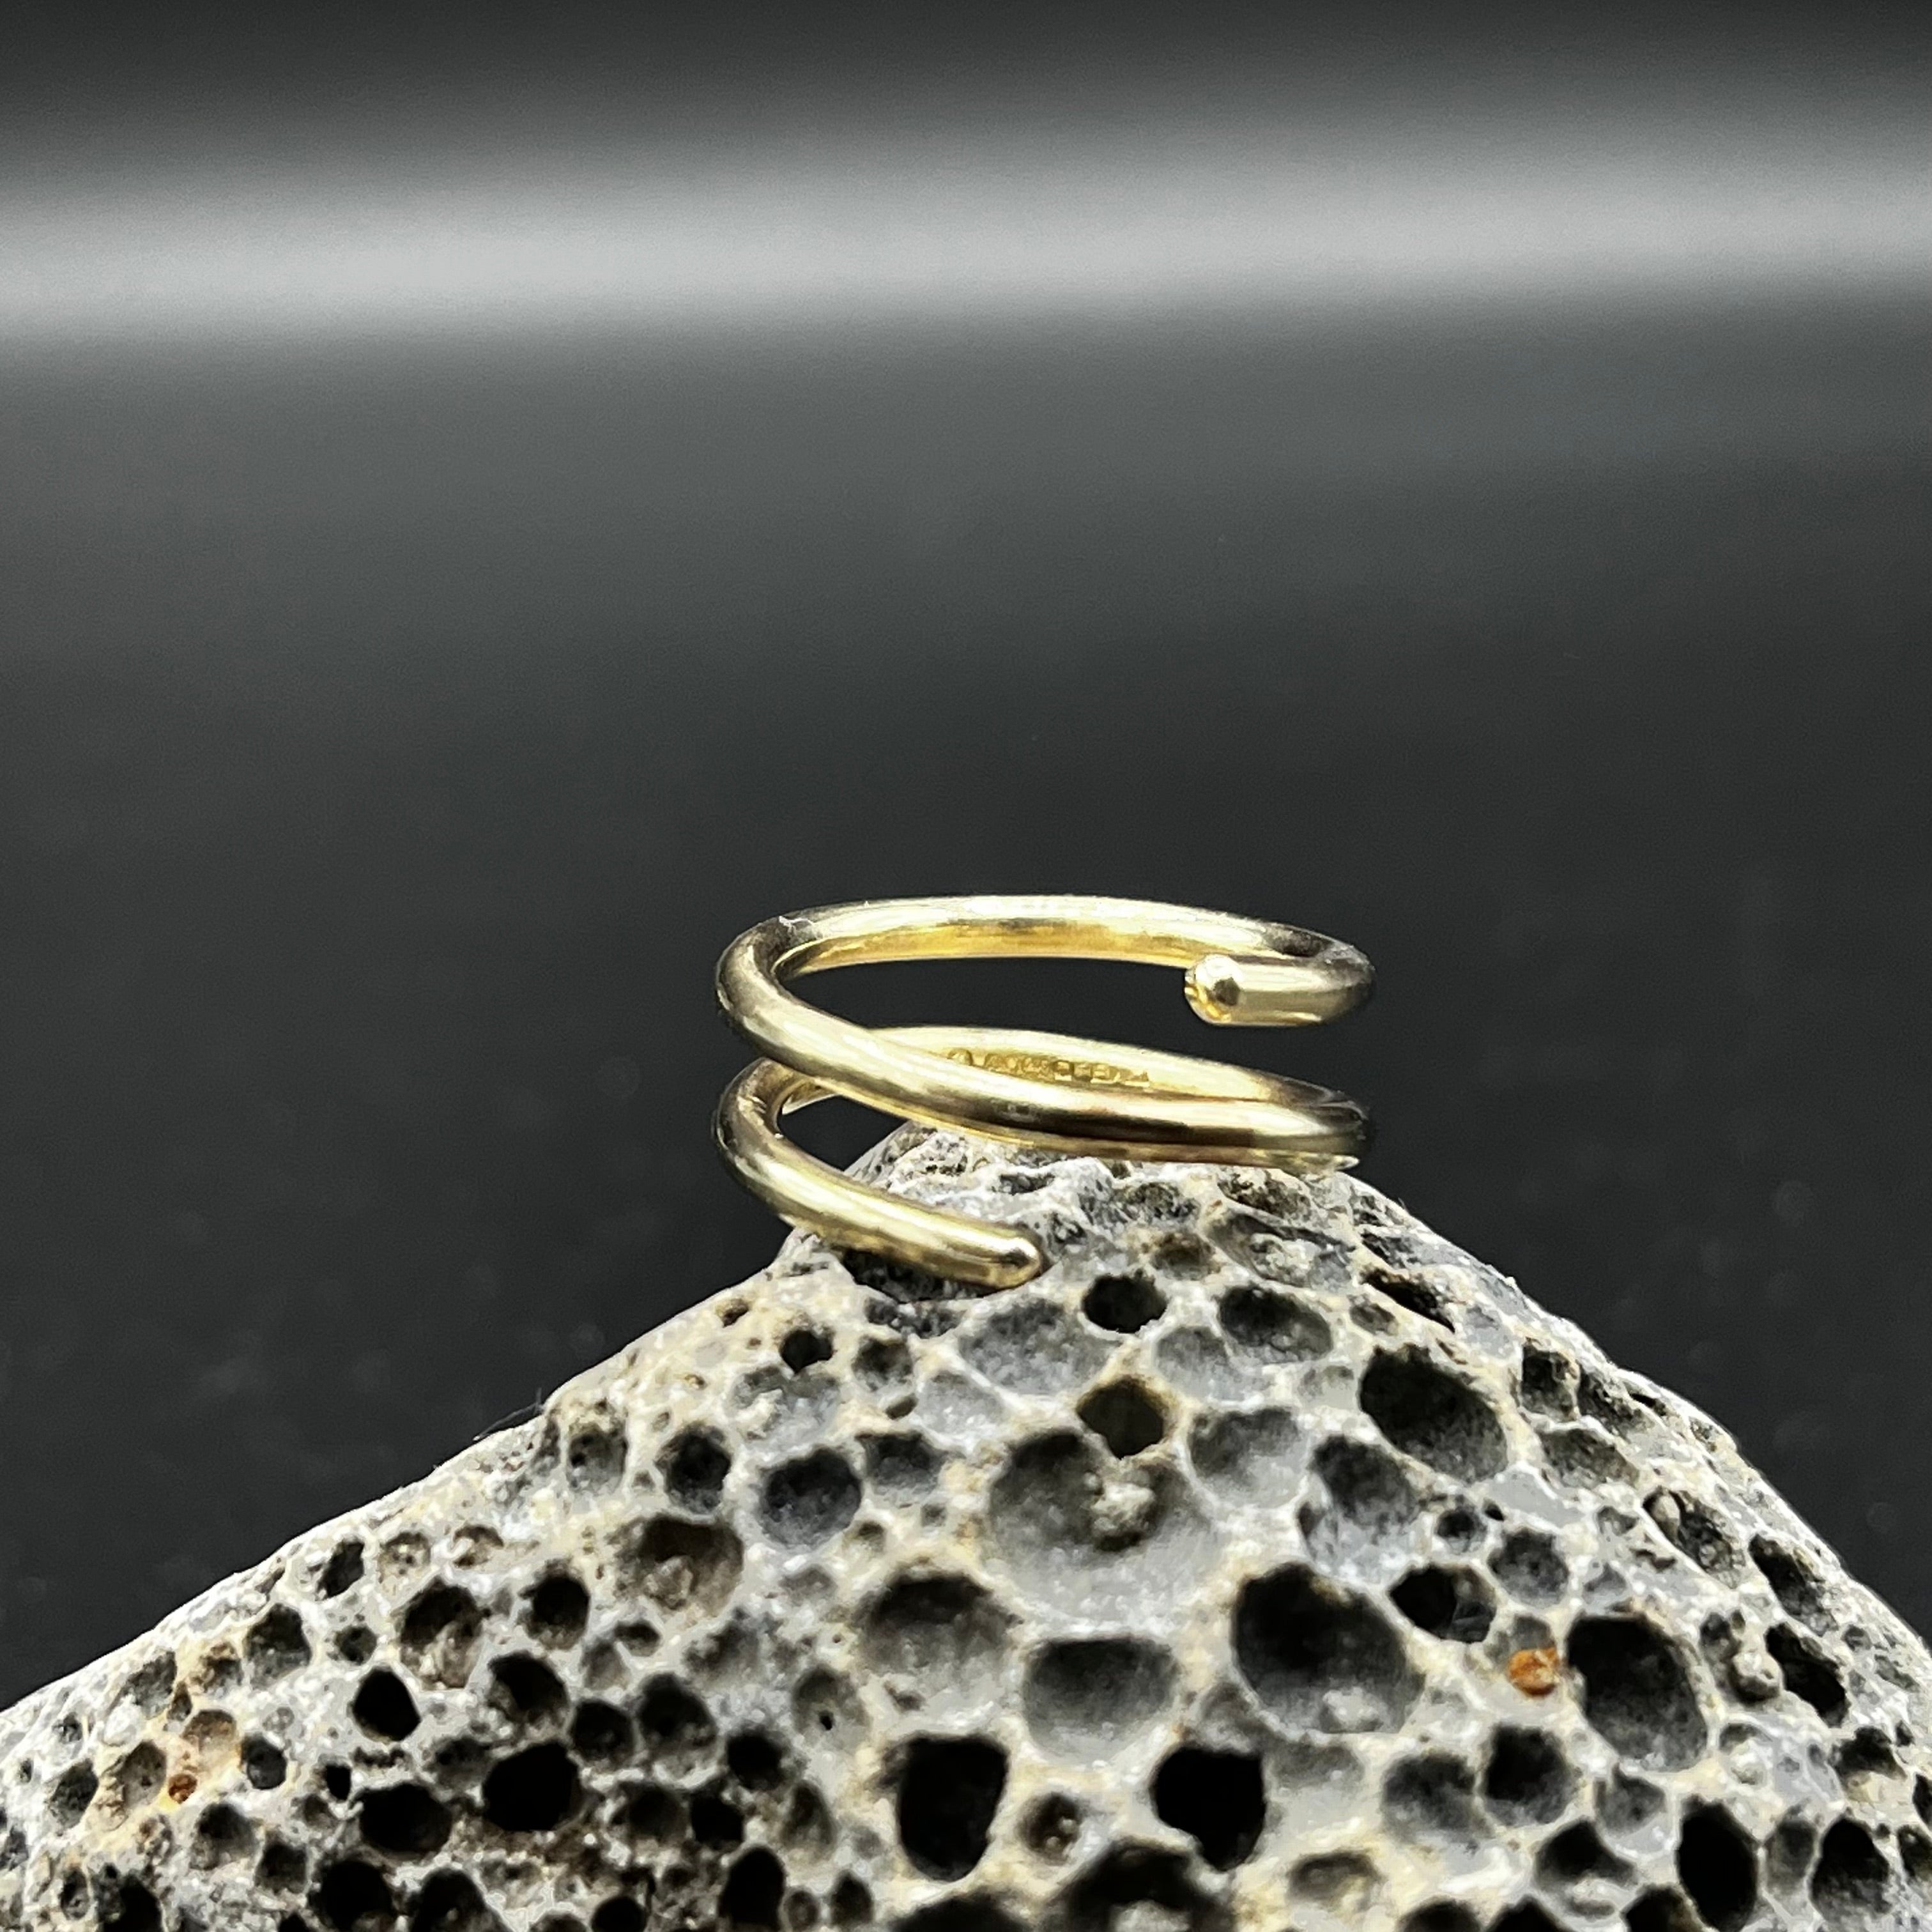 9ct yellow gold ring. Double crossover, round wire polished finish.